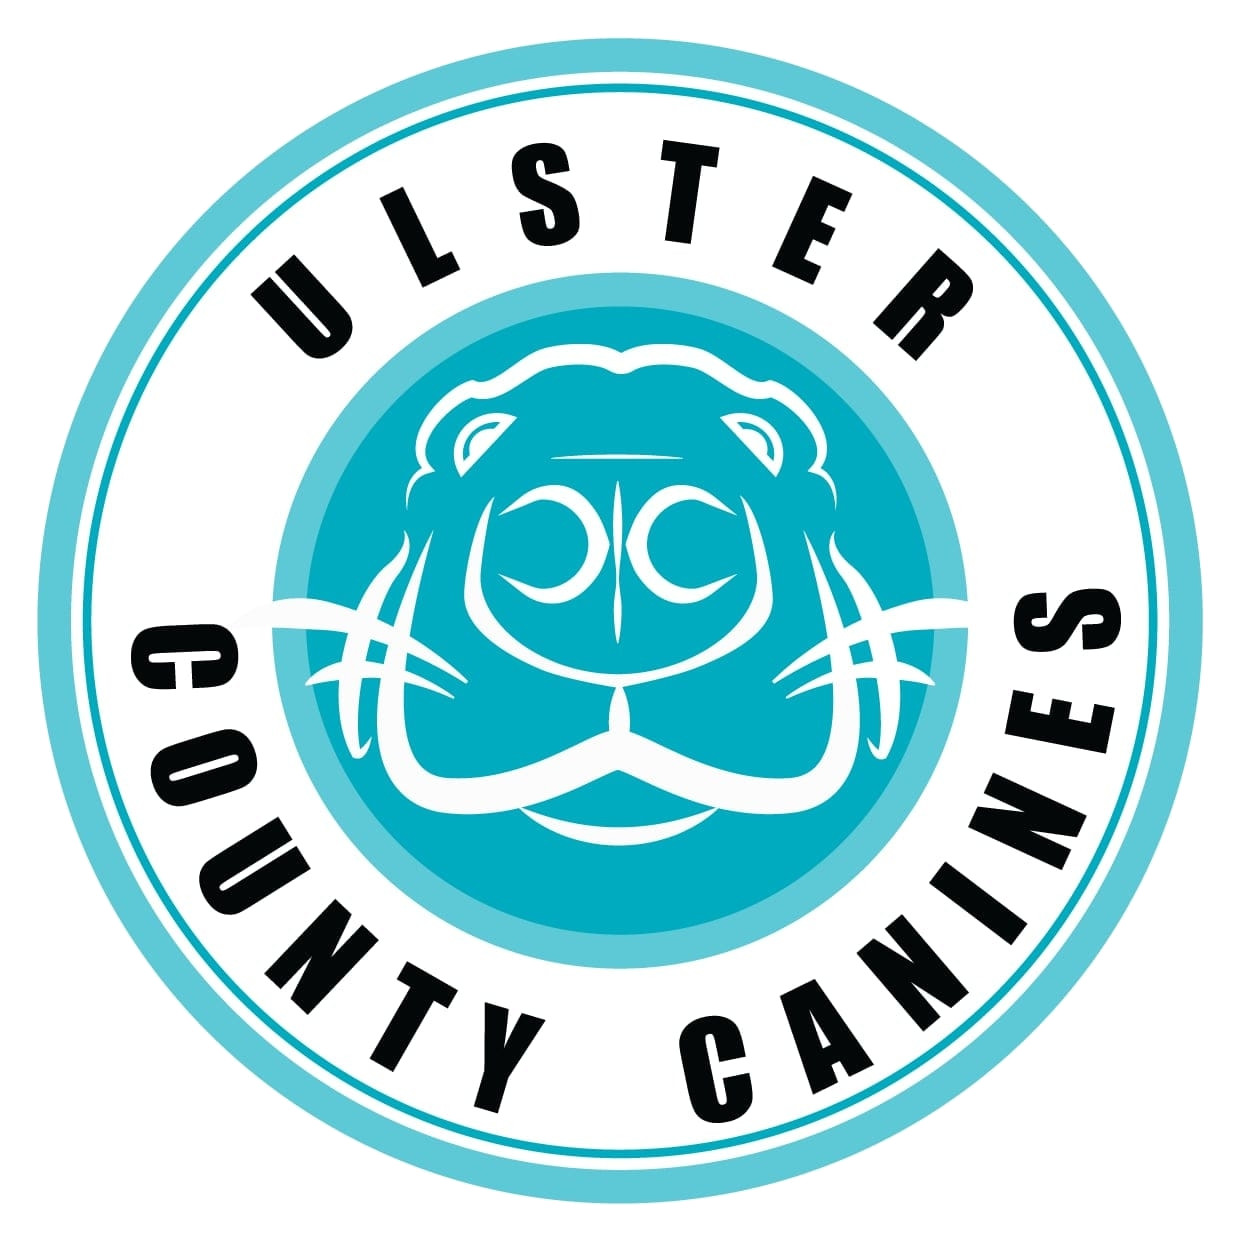 Ulster County Canines